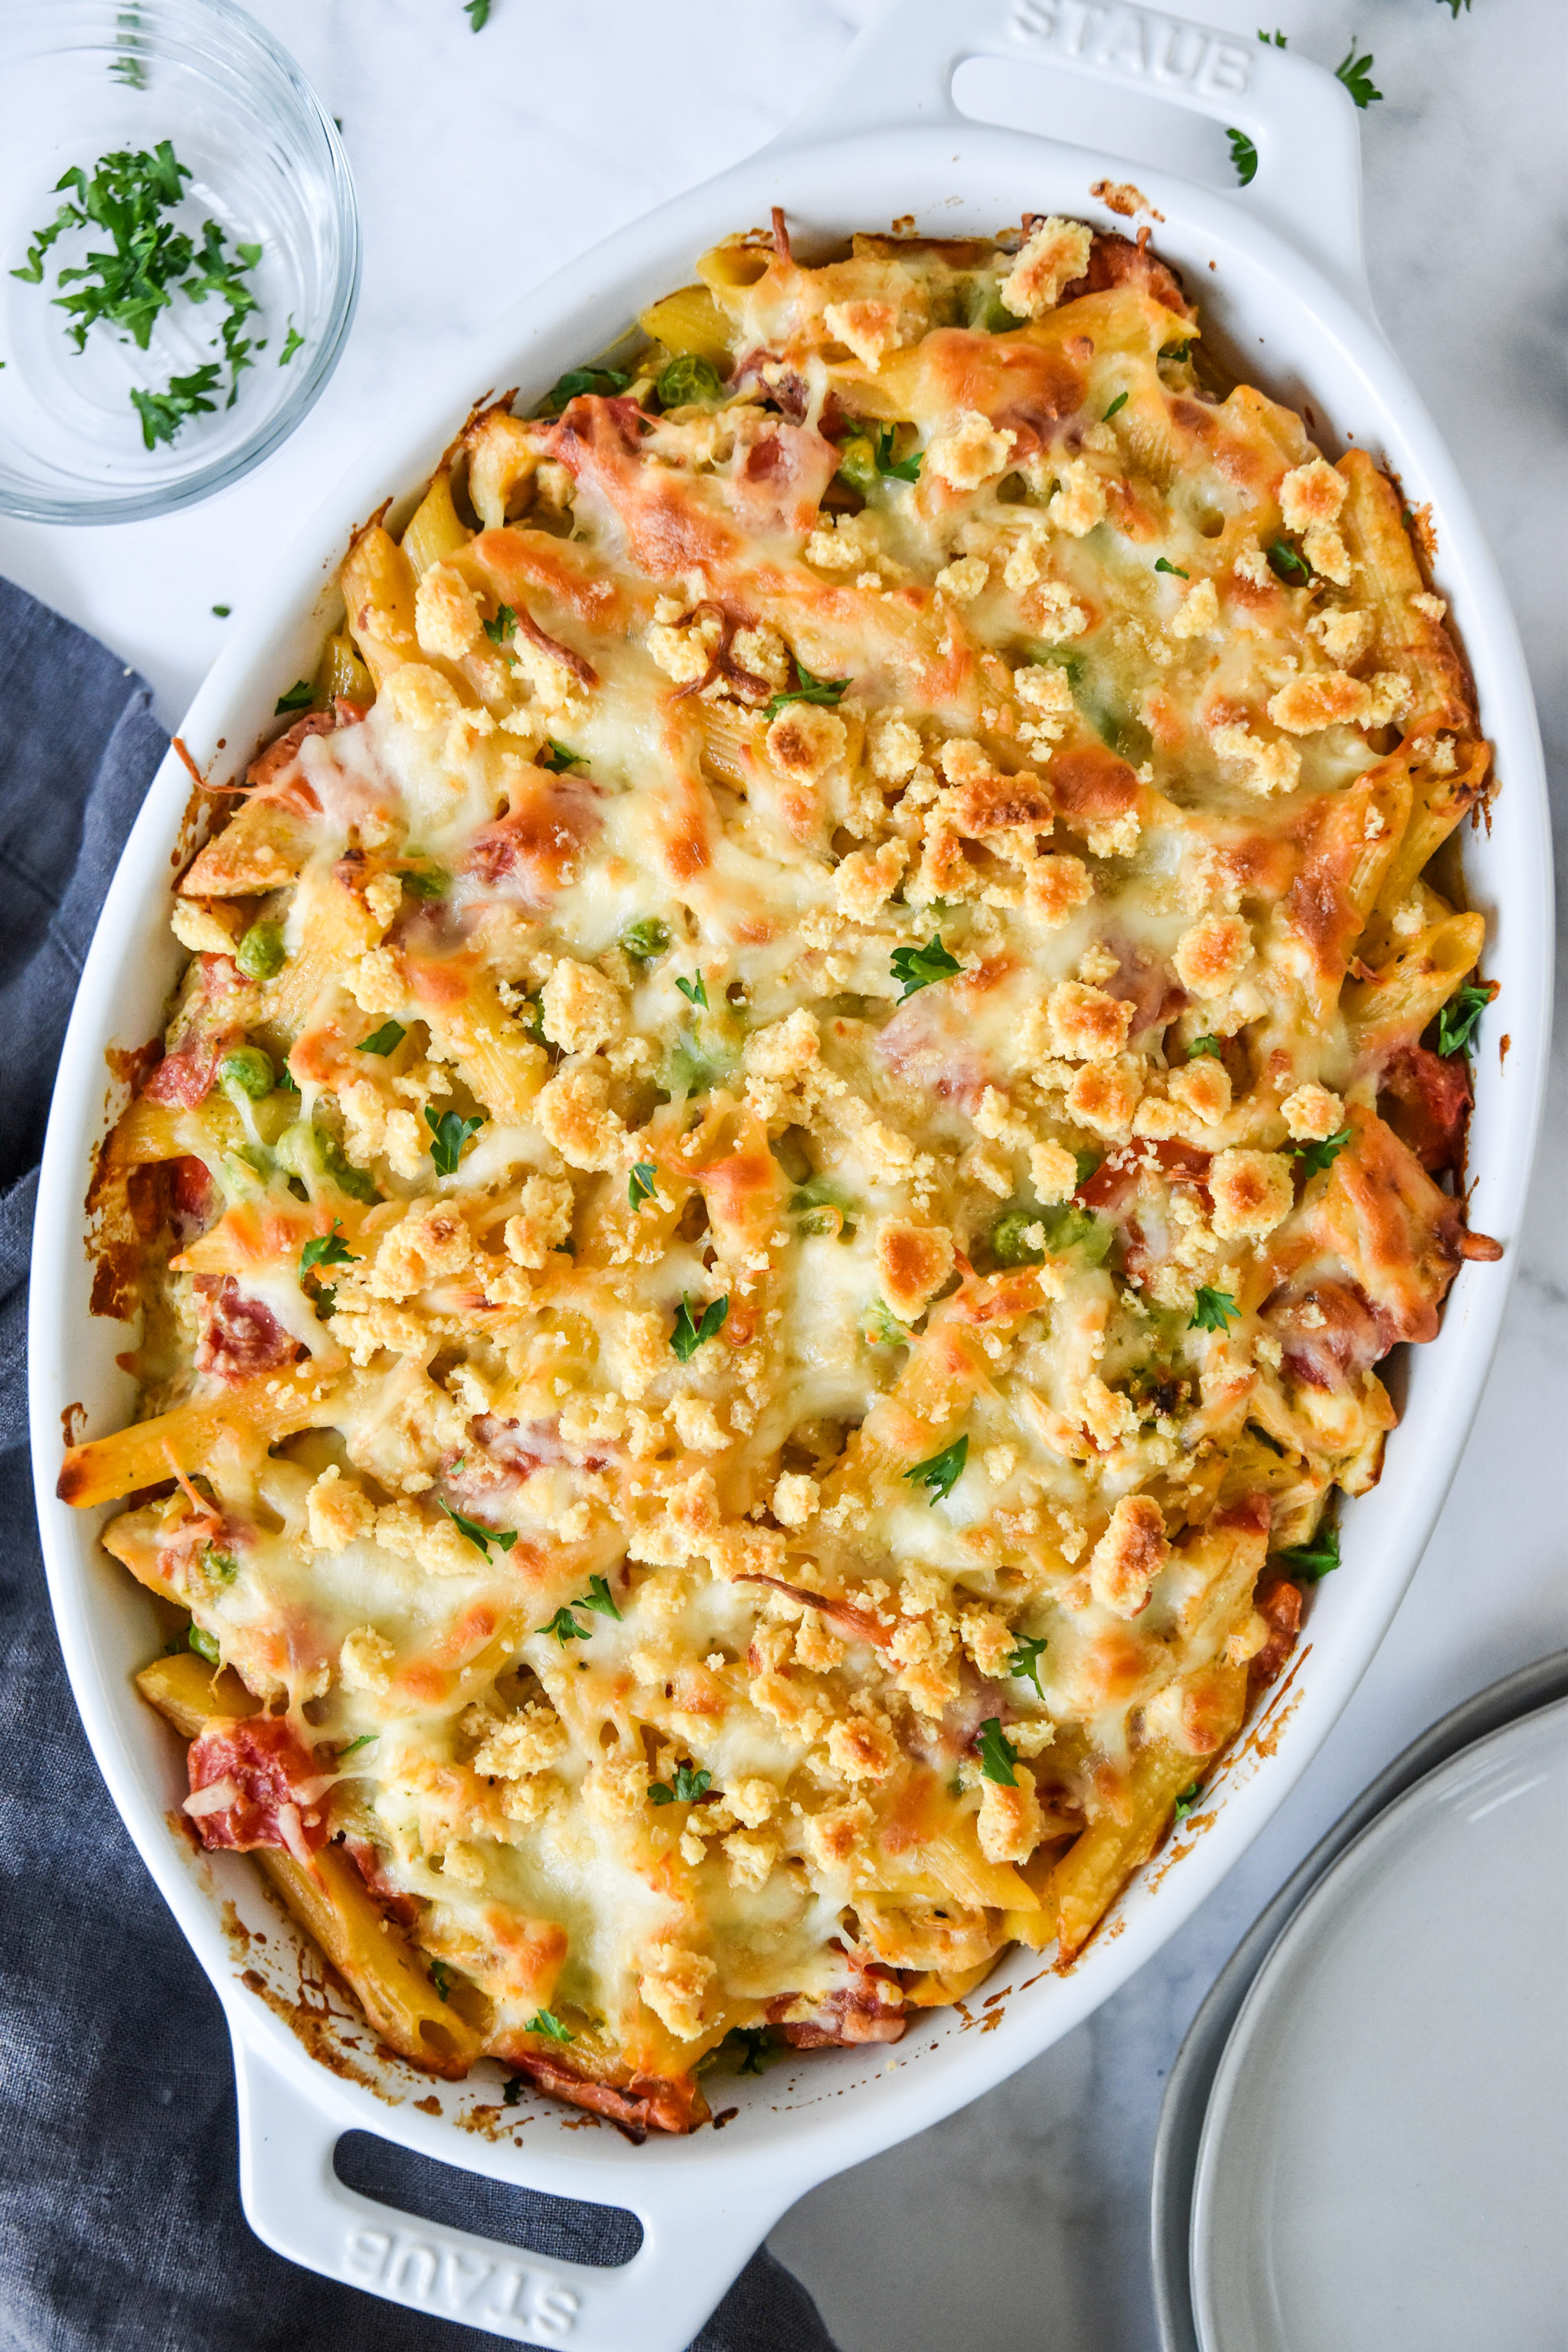 creamy pesto pasta chicken bake fresh from the oven in a white baking dish.